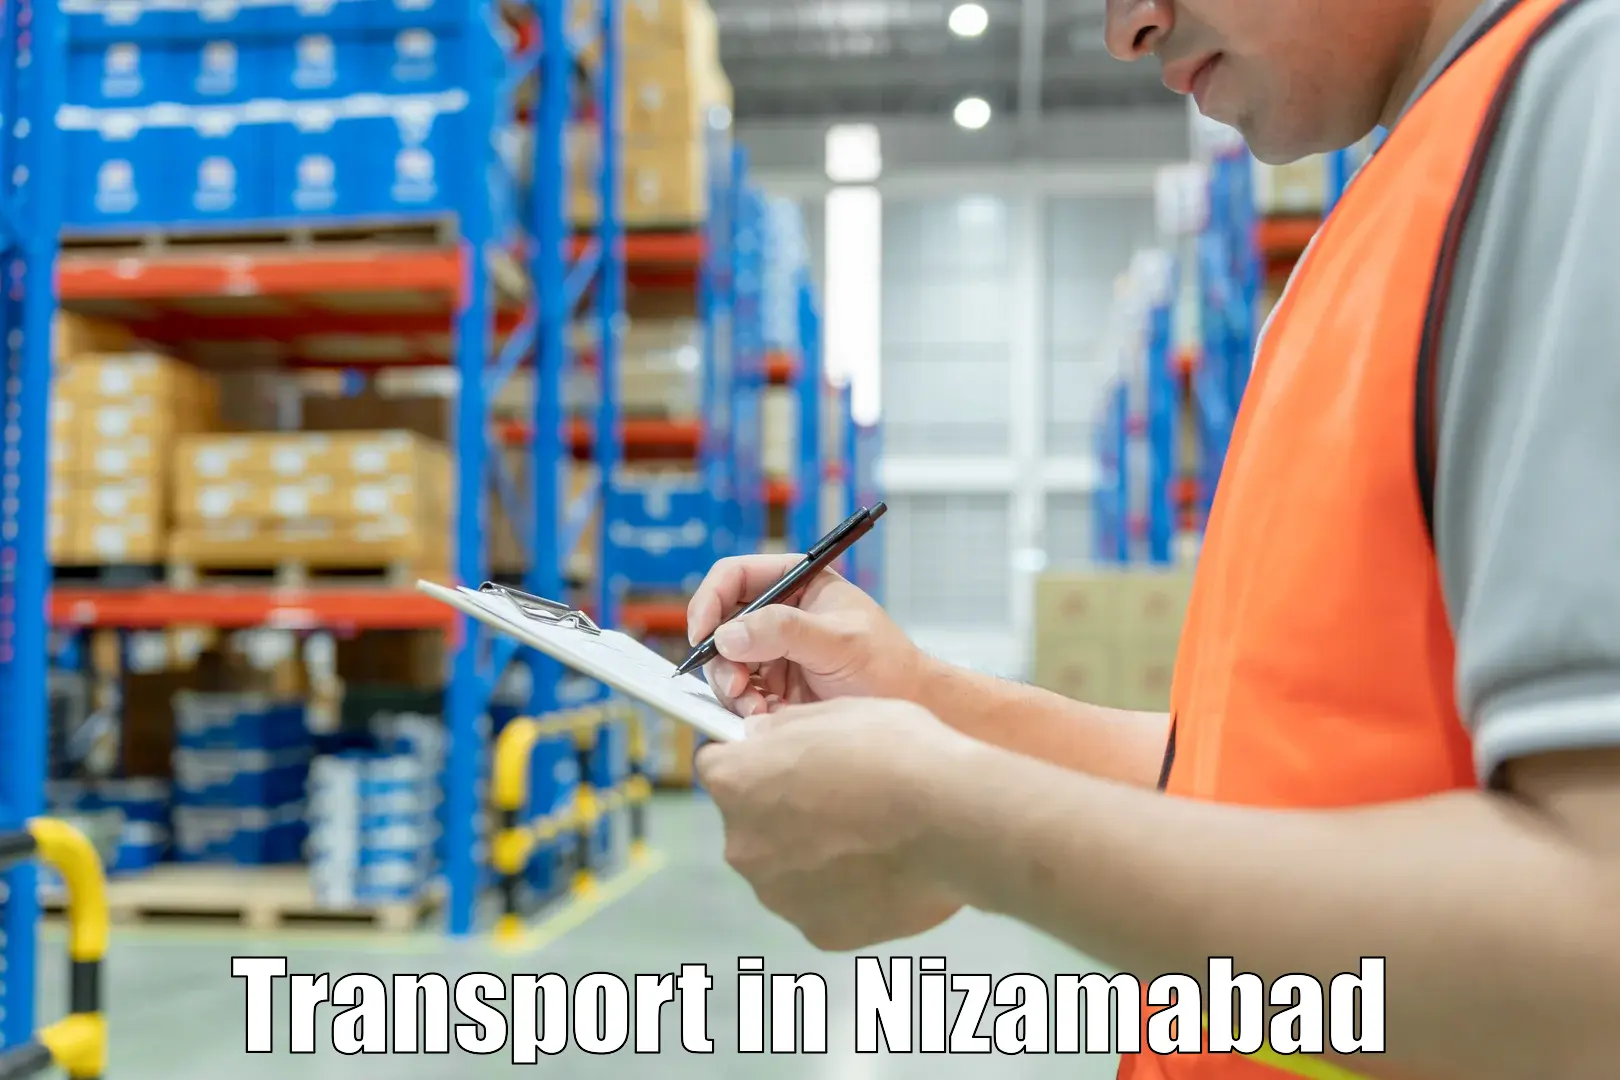 Luggage transport services in Nizamabad